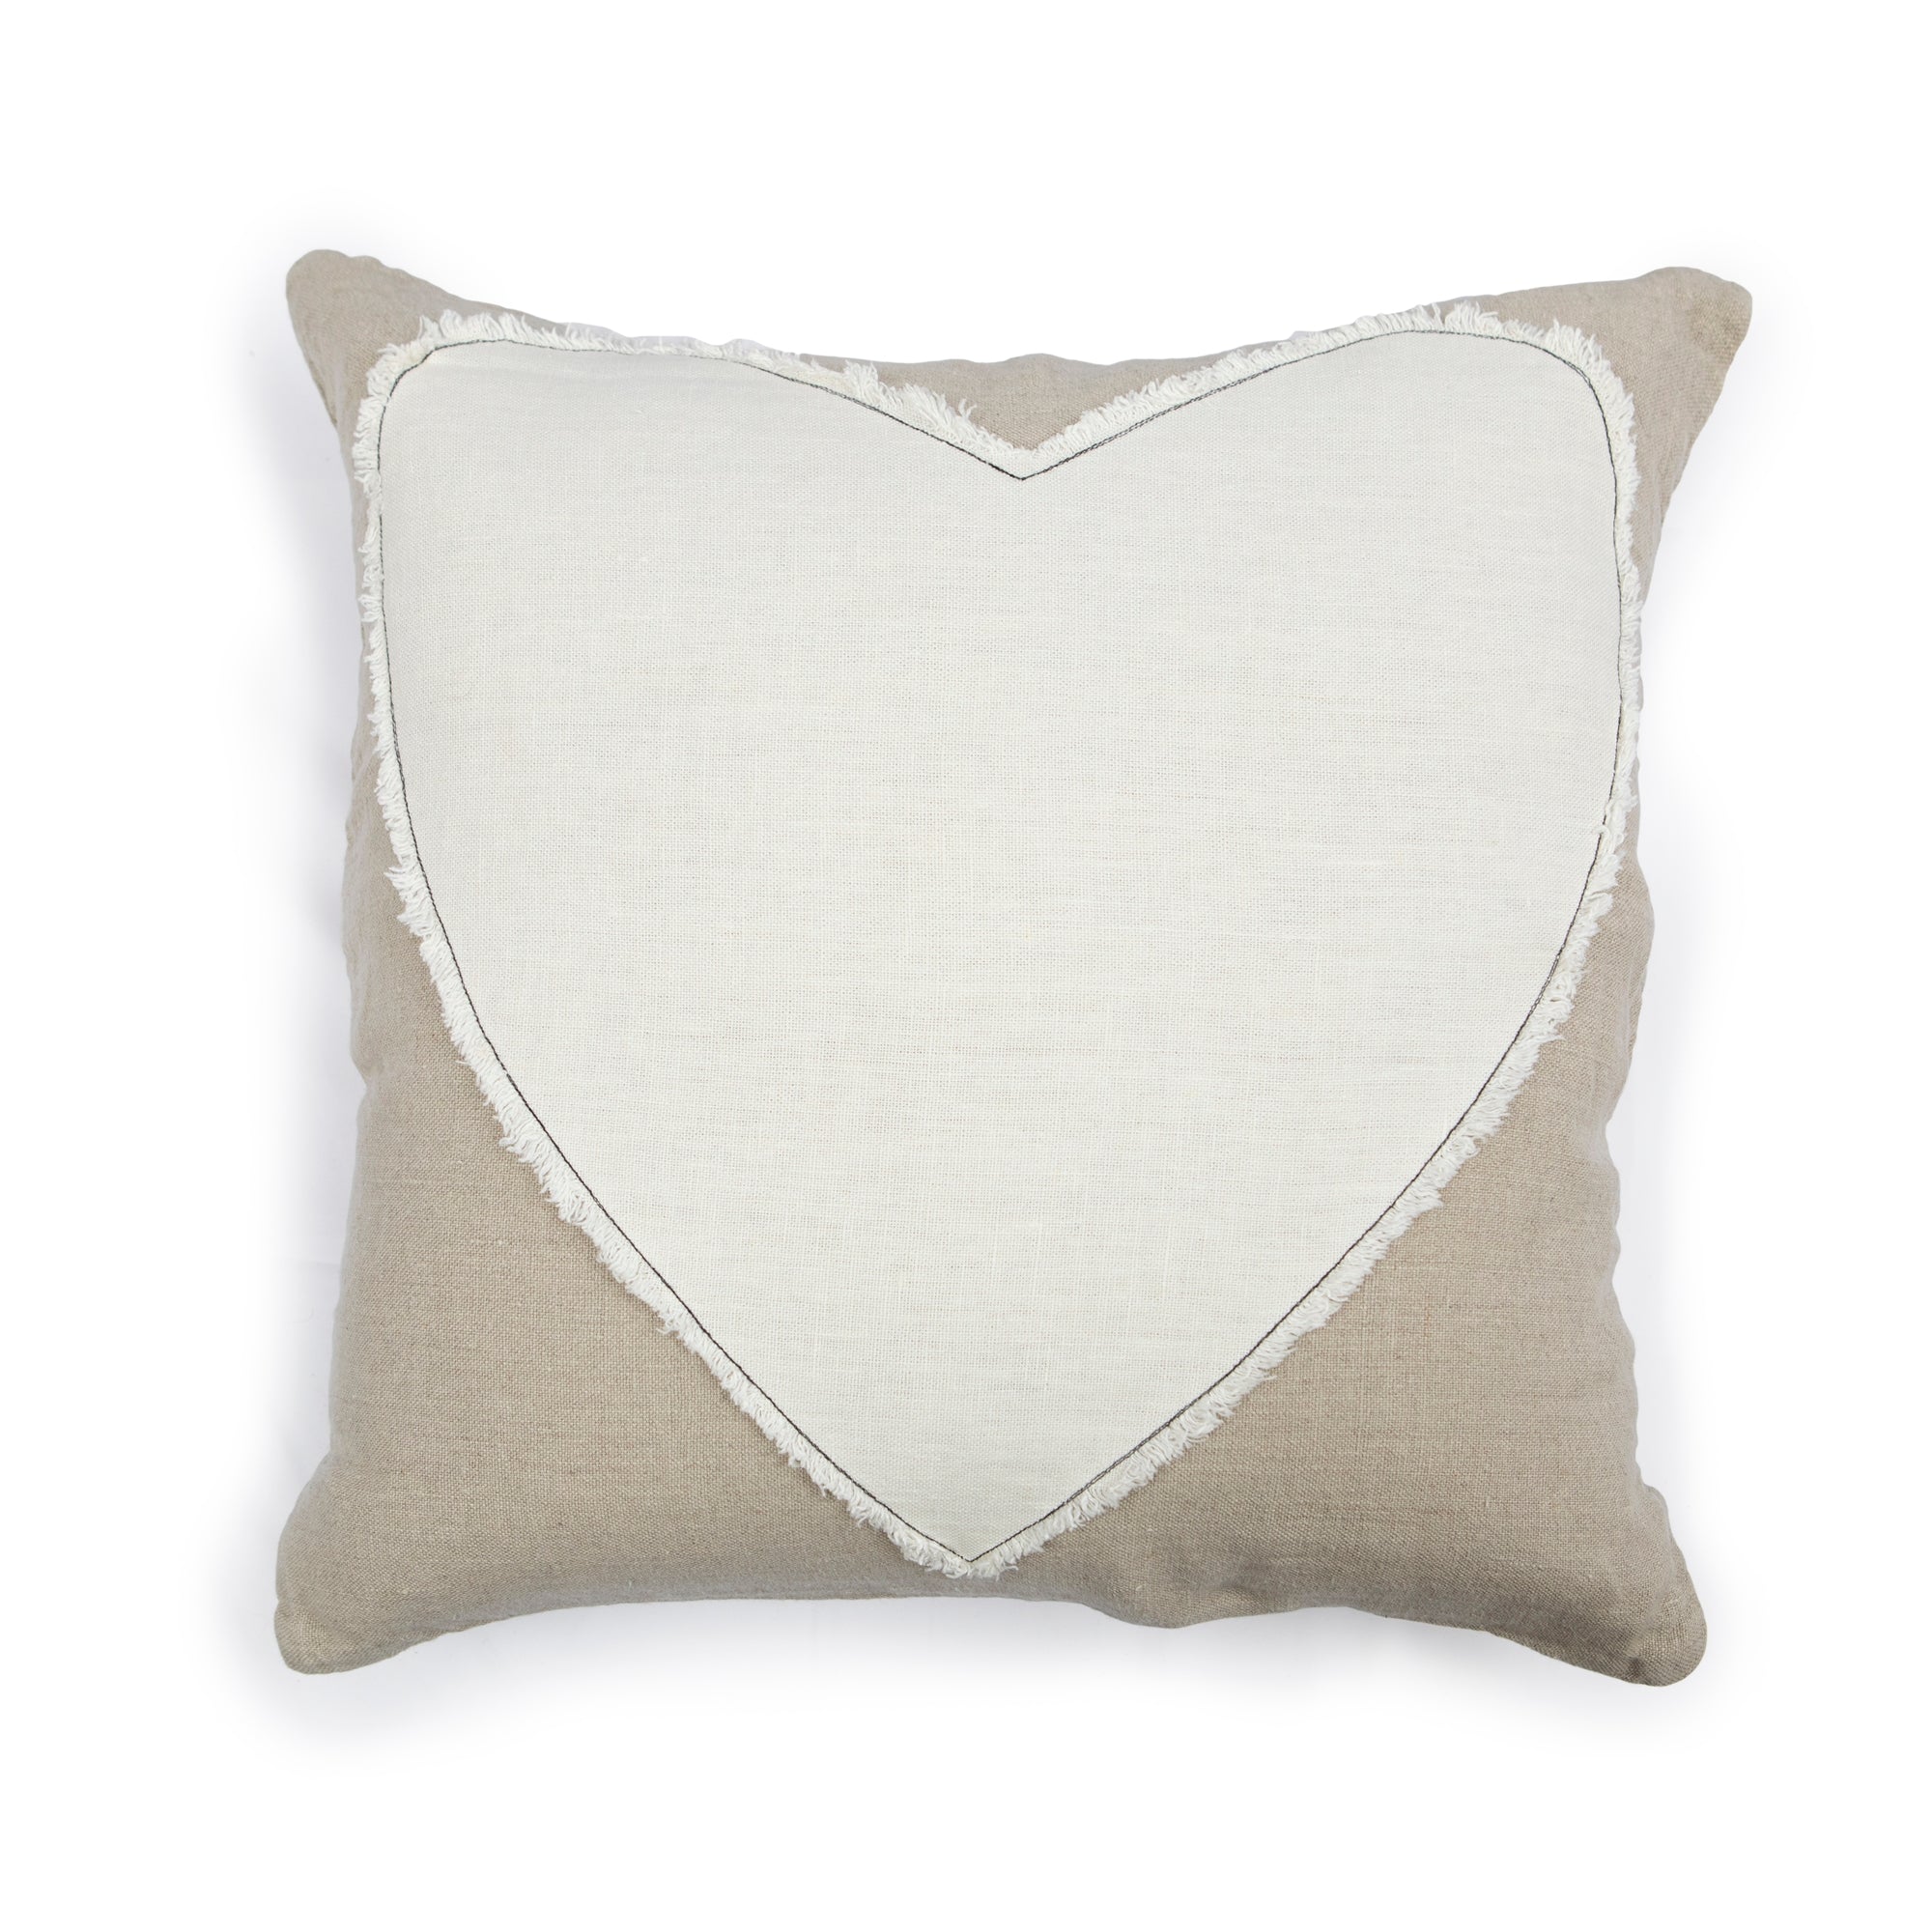 Sugarboo Designs Heart Stitched Pillow